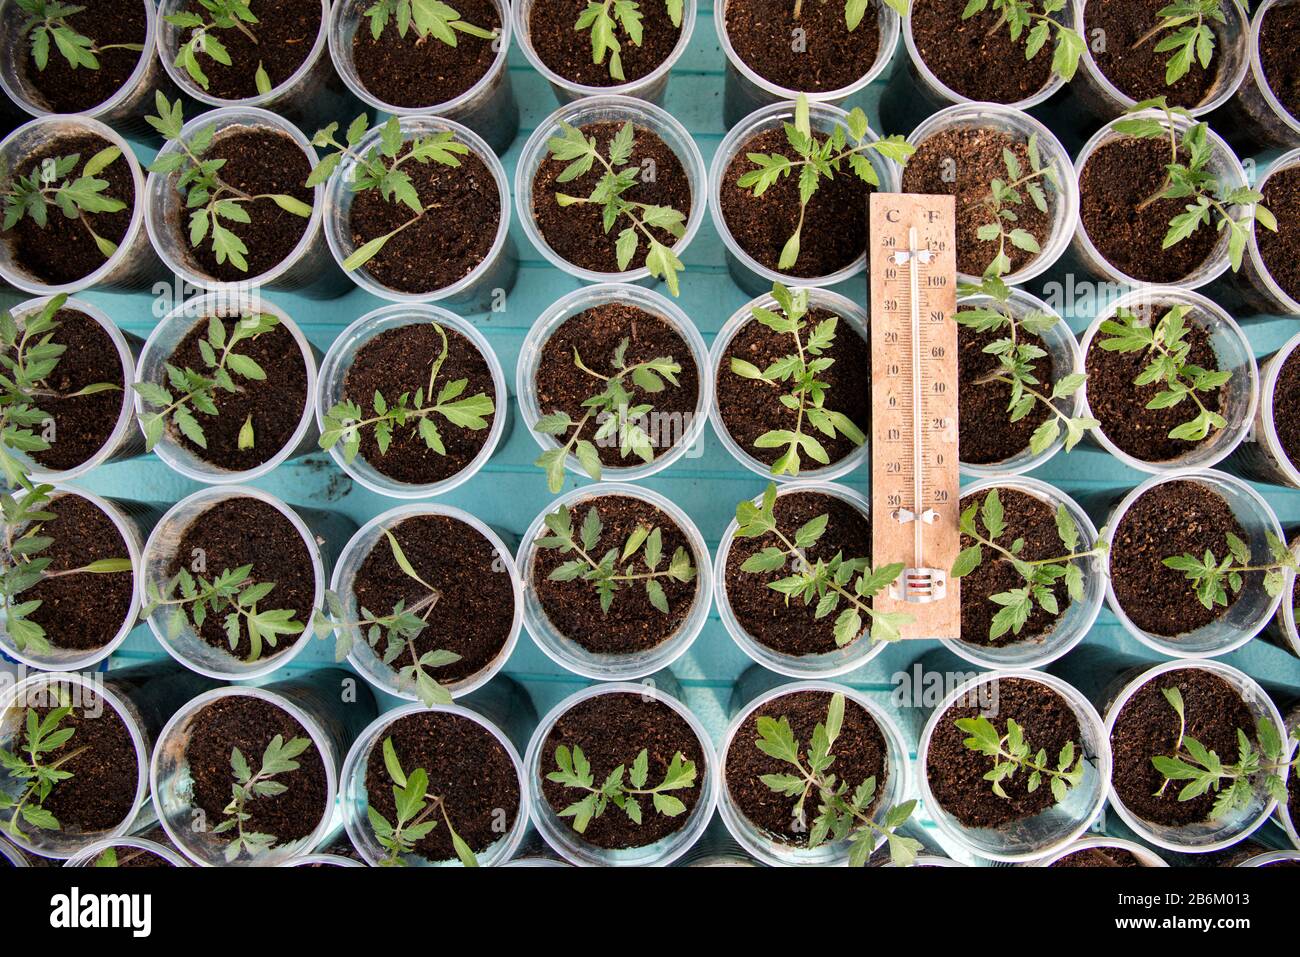 Tomato seedlings in a greenhouse and a thermometer showing the temperature of the growing environment - selective focus, top view Stock Photo